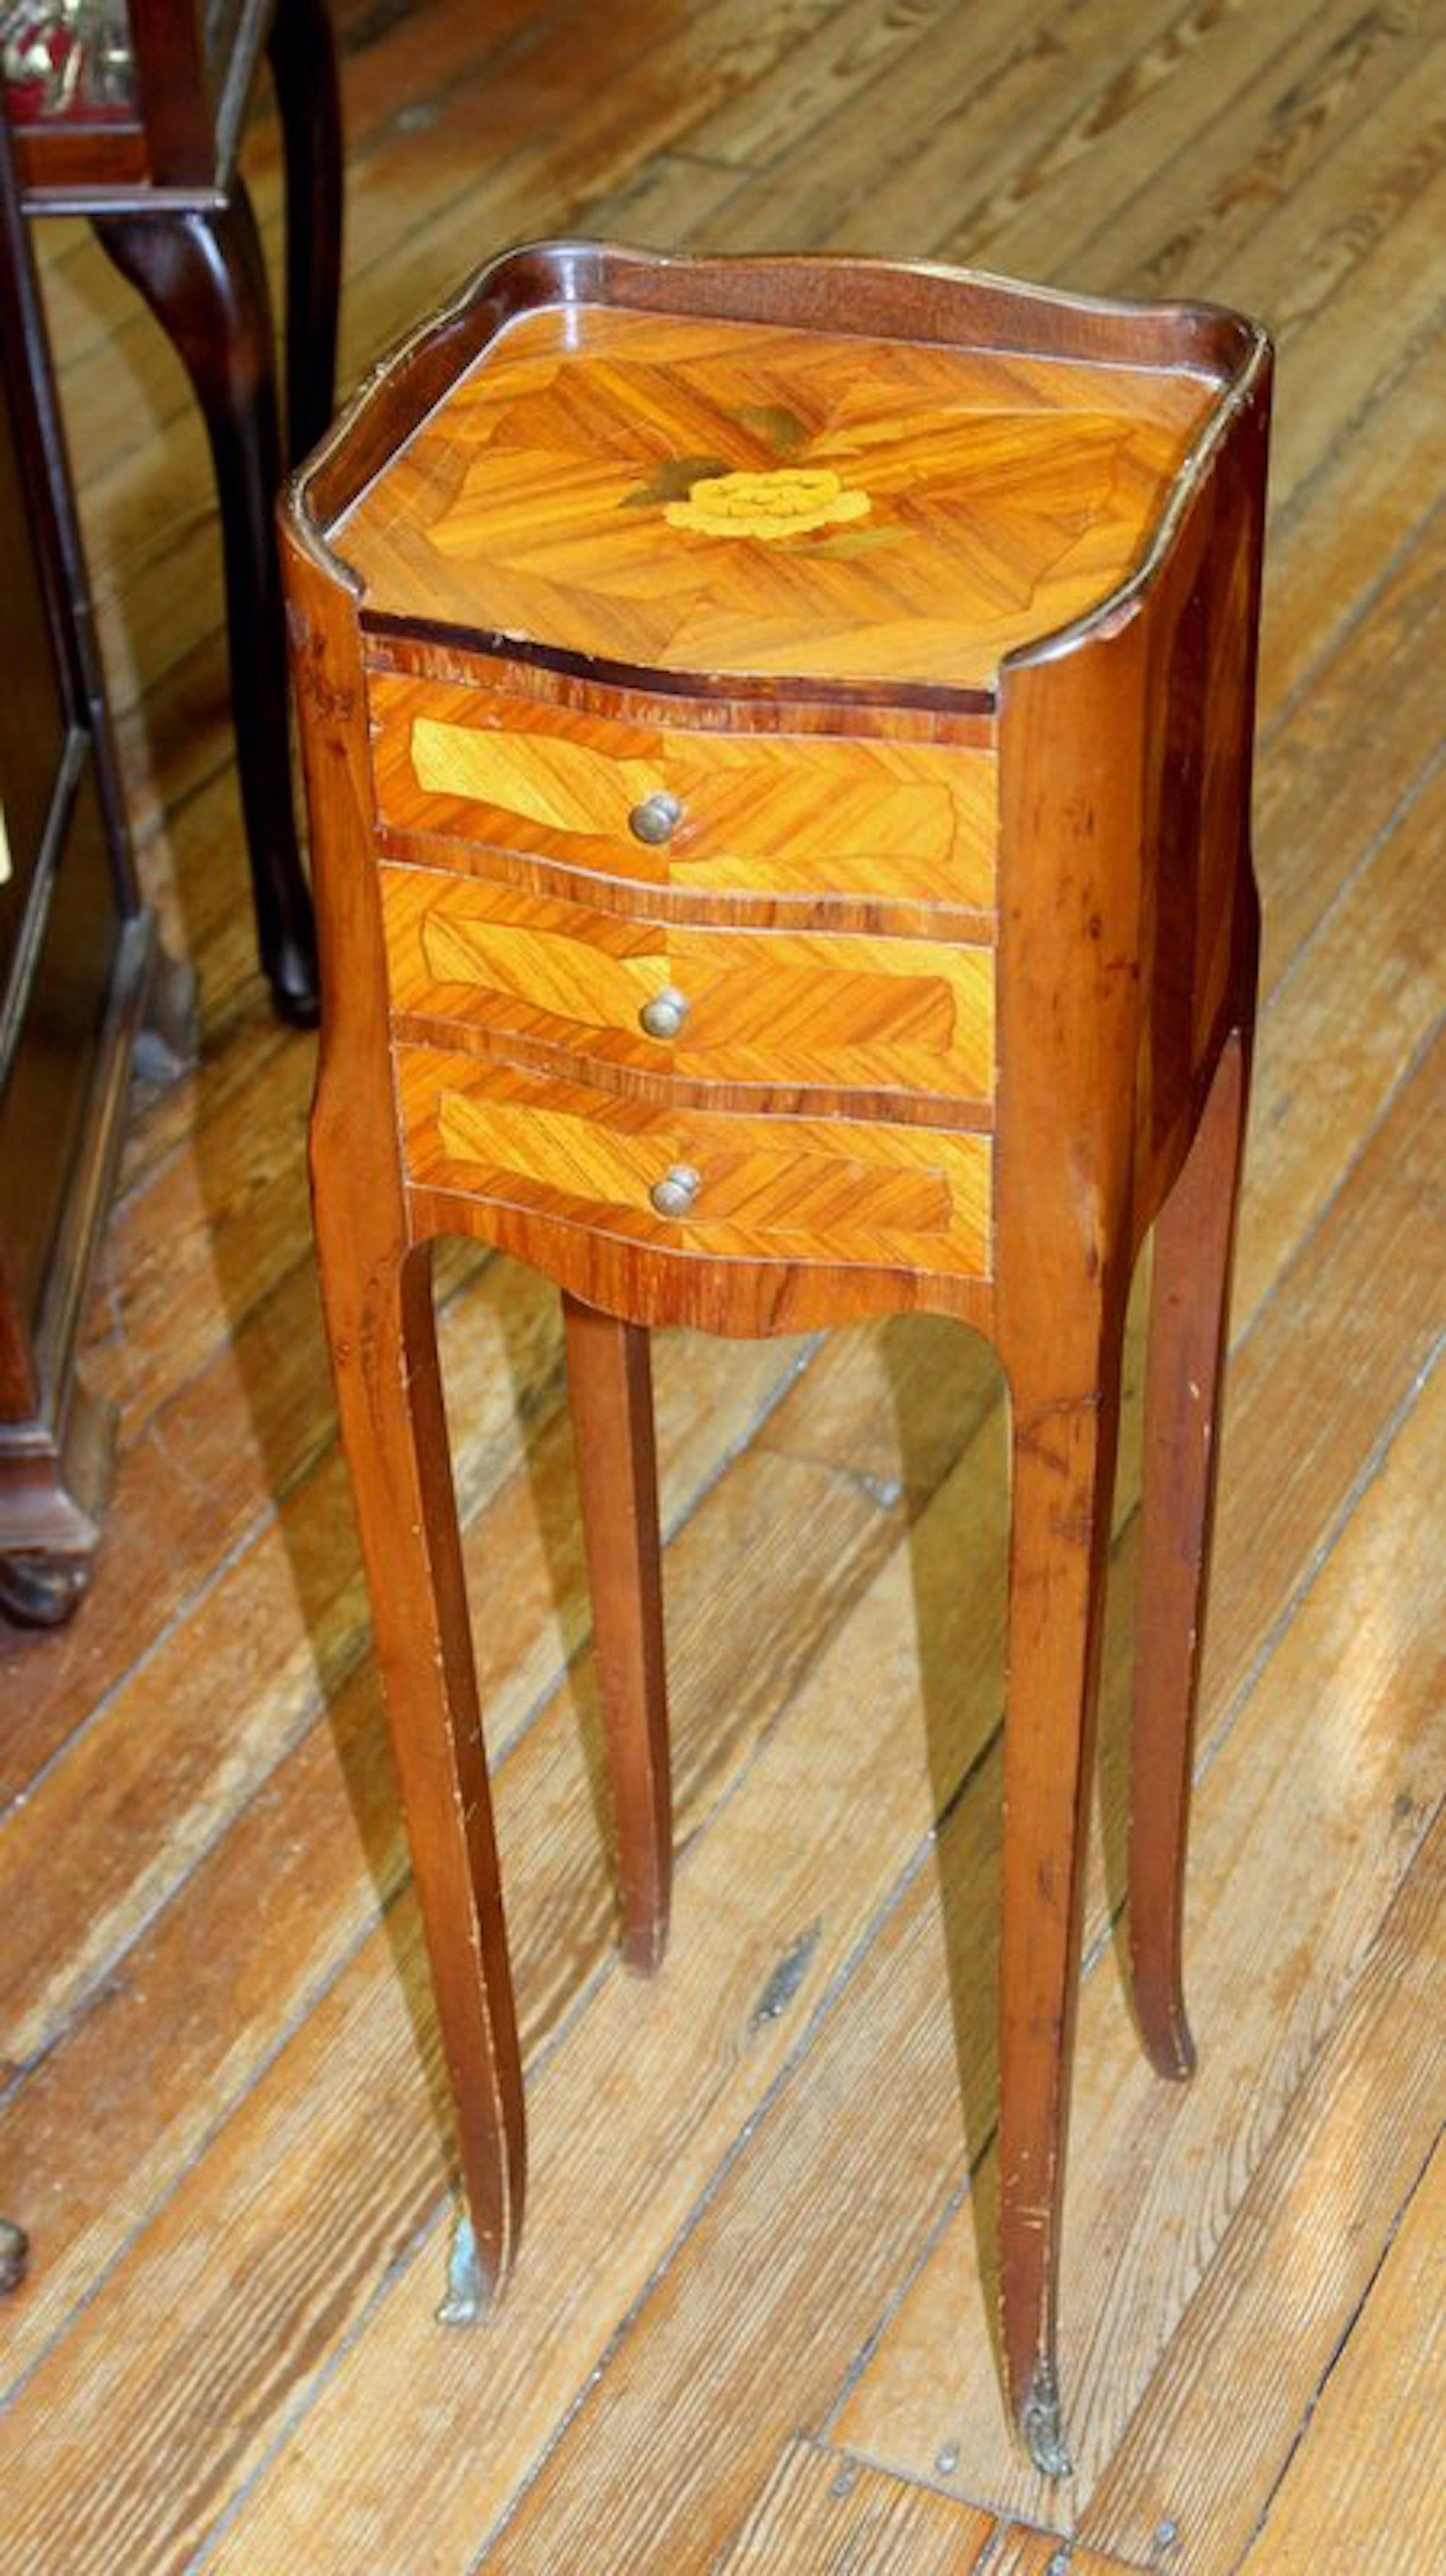 Lovely old French unusually small inlaid Kingwood bedside table with handsome ormolu mounts.